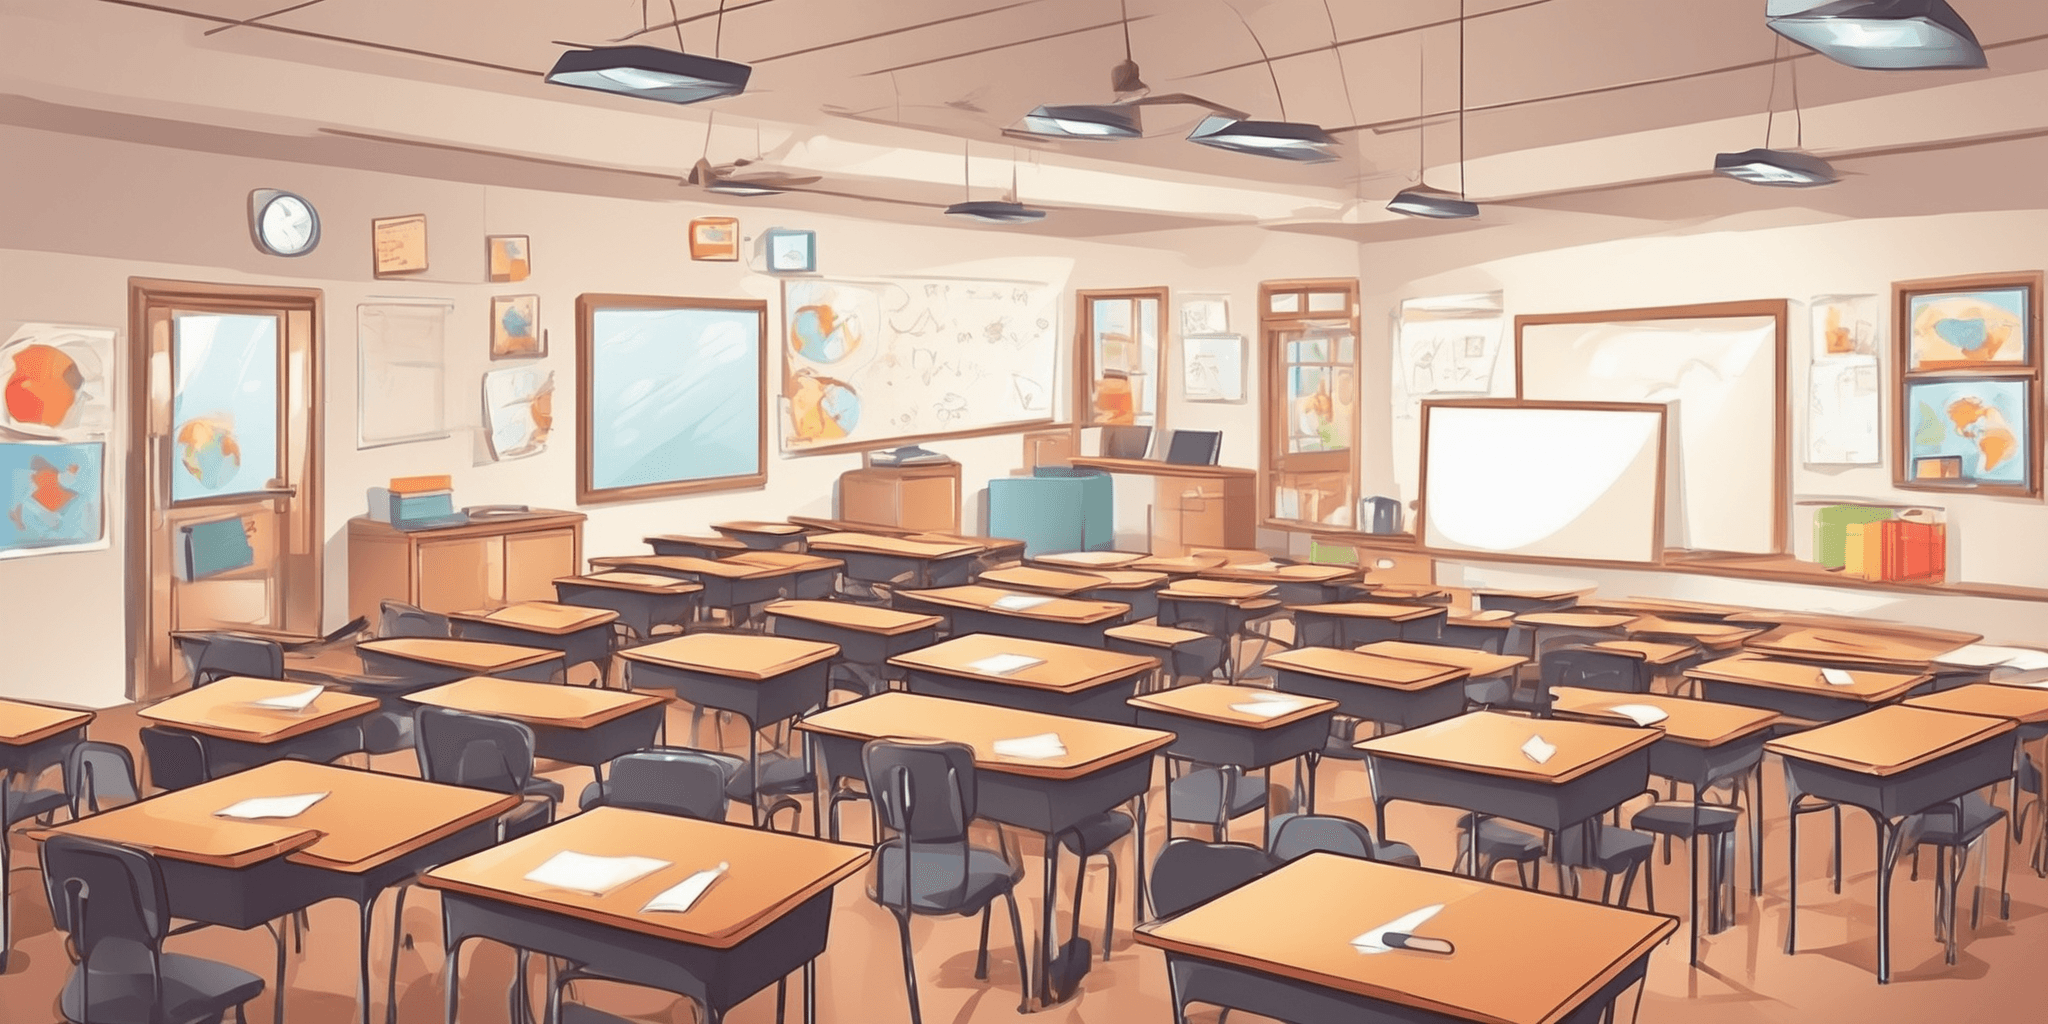 Classroom in illustration style with gradients and white background